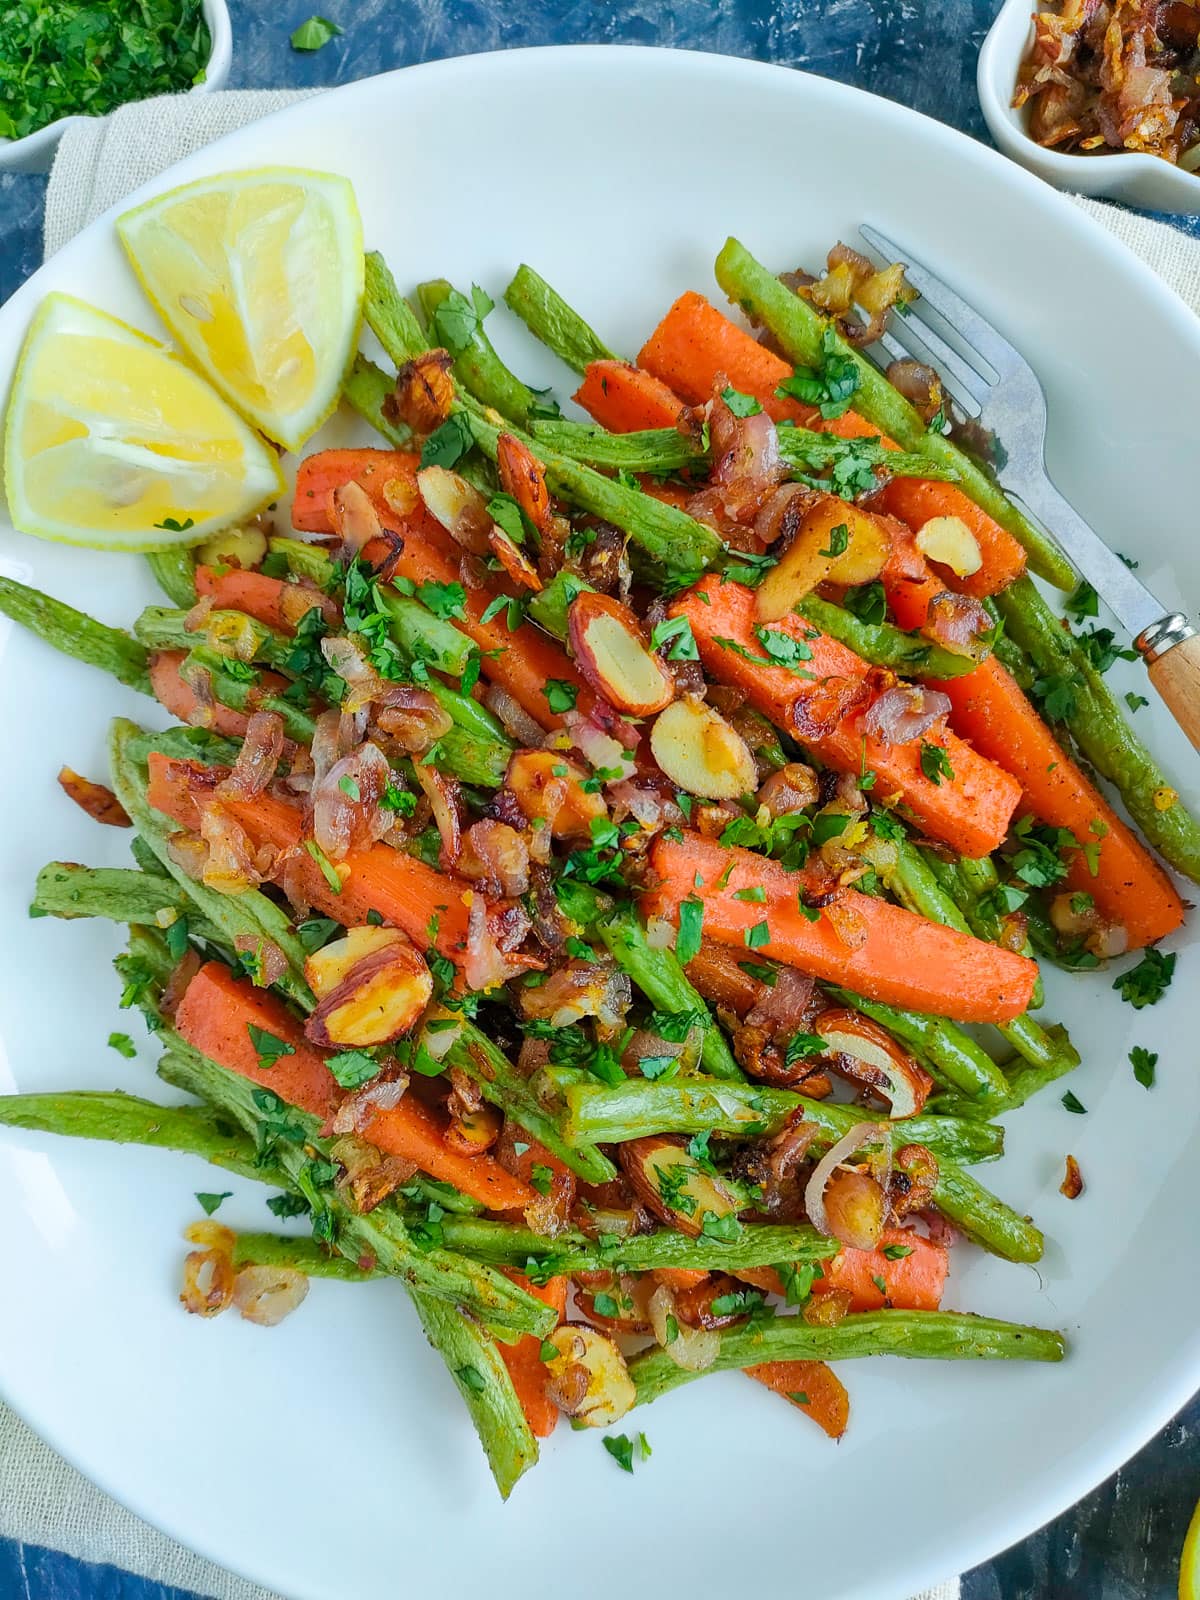 Roasted green beans and carrots with toasted almond topping and lemon wedges on a white plate.